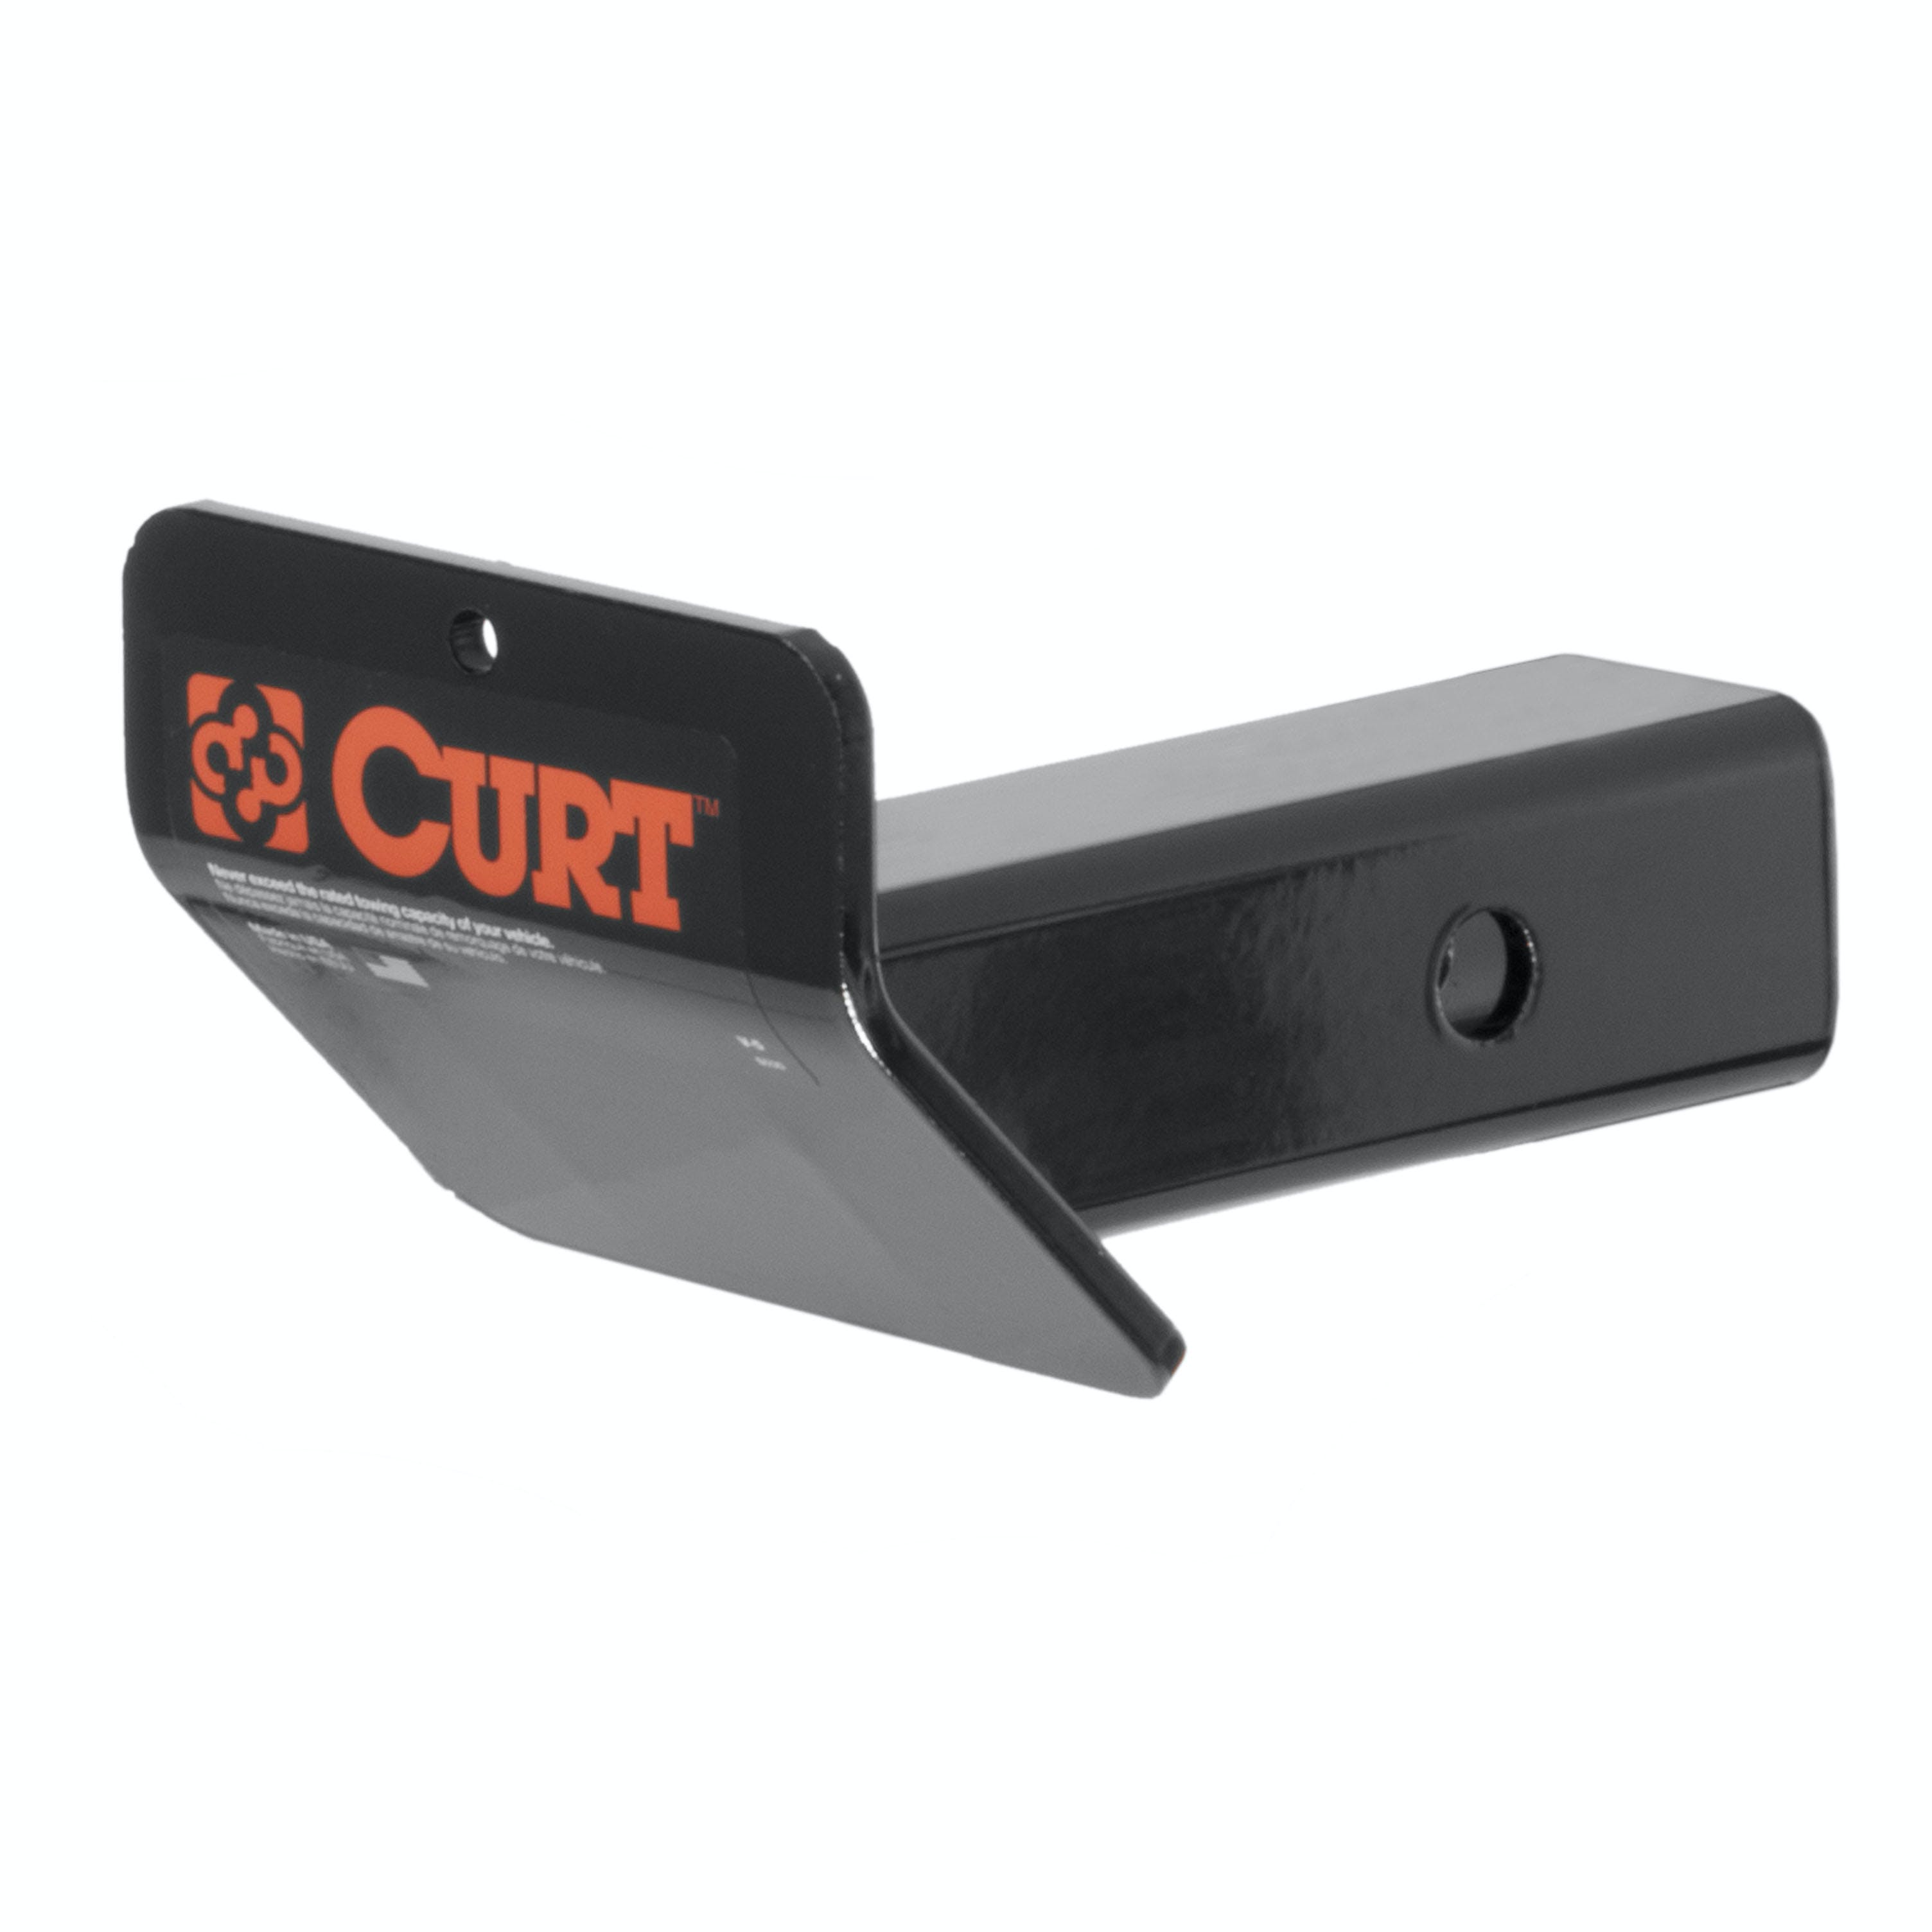 CURT 31007 Hitch-Mounted Skid Shield (Fits 2 Receiver)